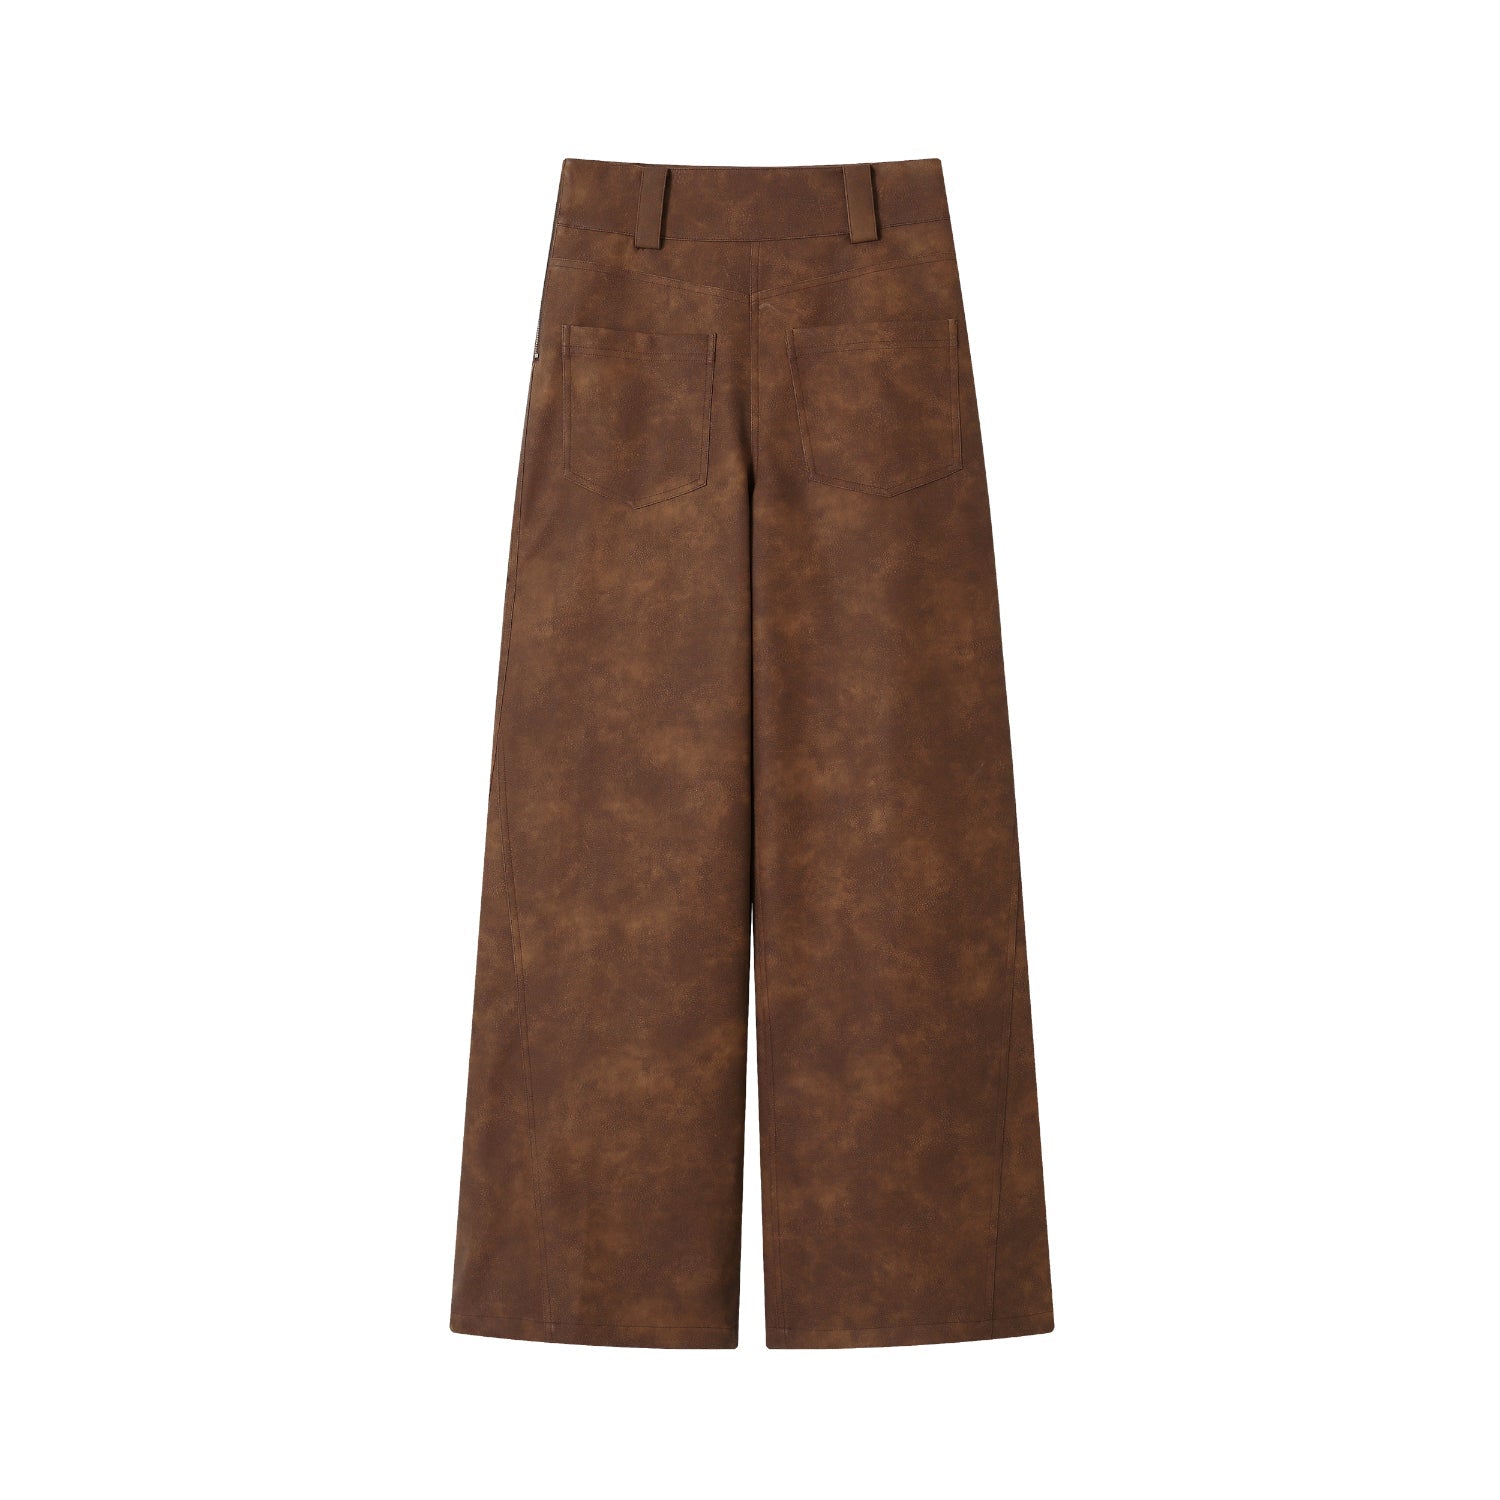 SOMESOWE Retro Dyed Faux Leather Straight Pants | MADA IN CHINA